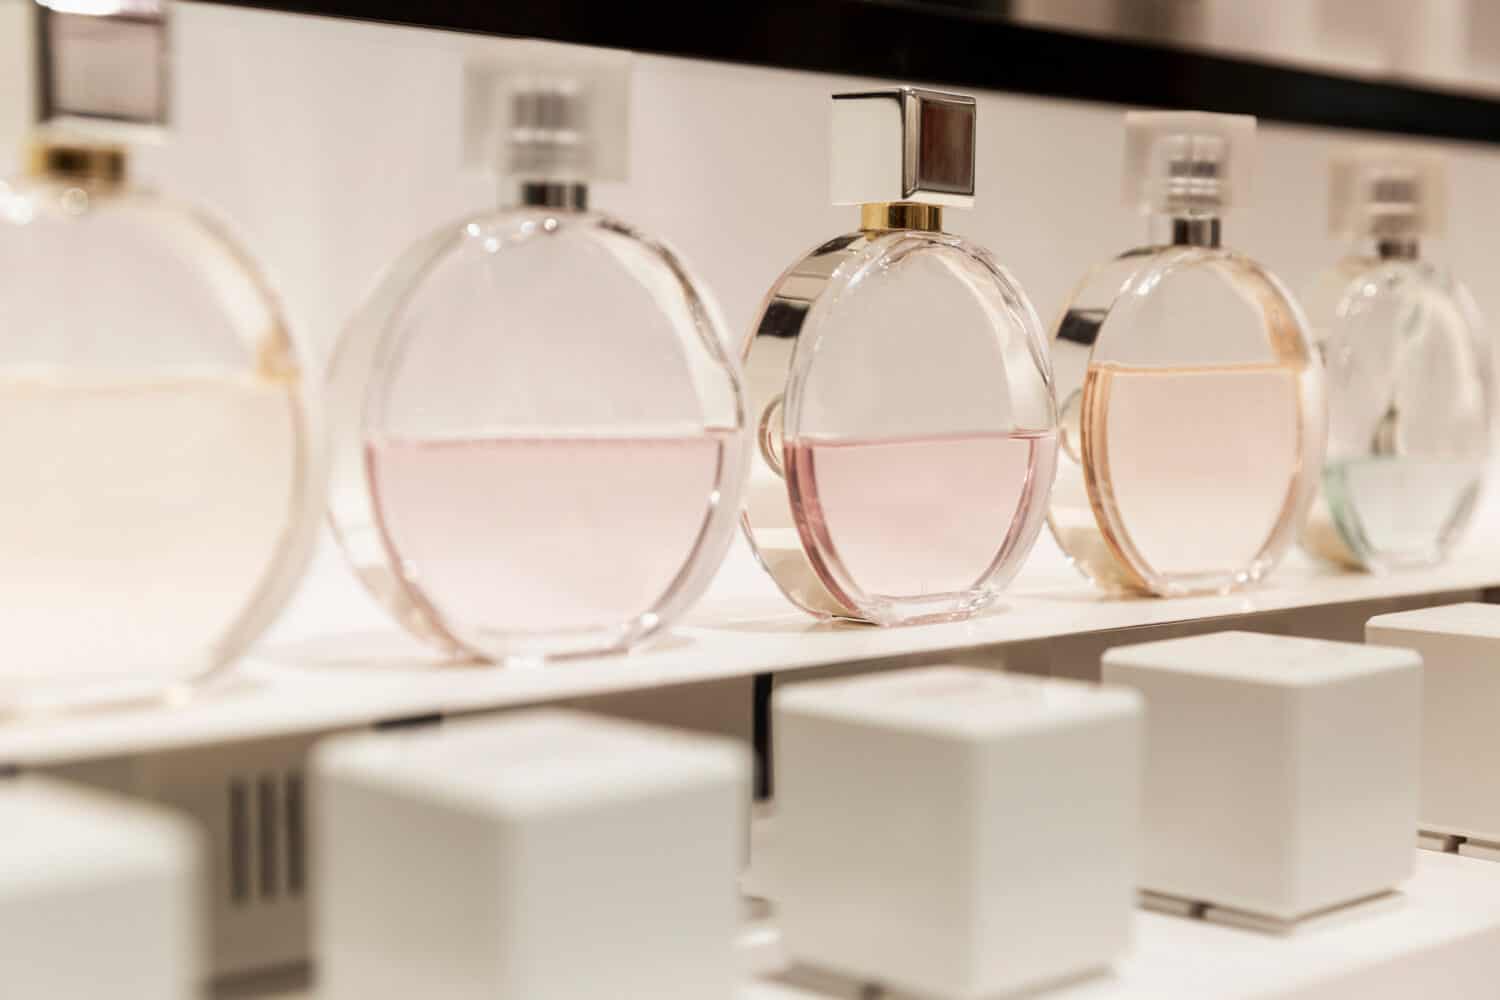 Chanel perfume bottles on the counter. Elegance and style. Close-up.